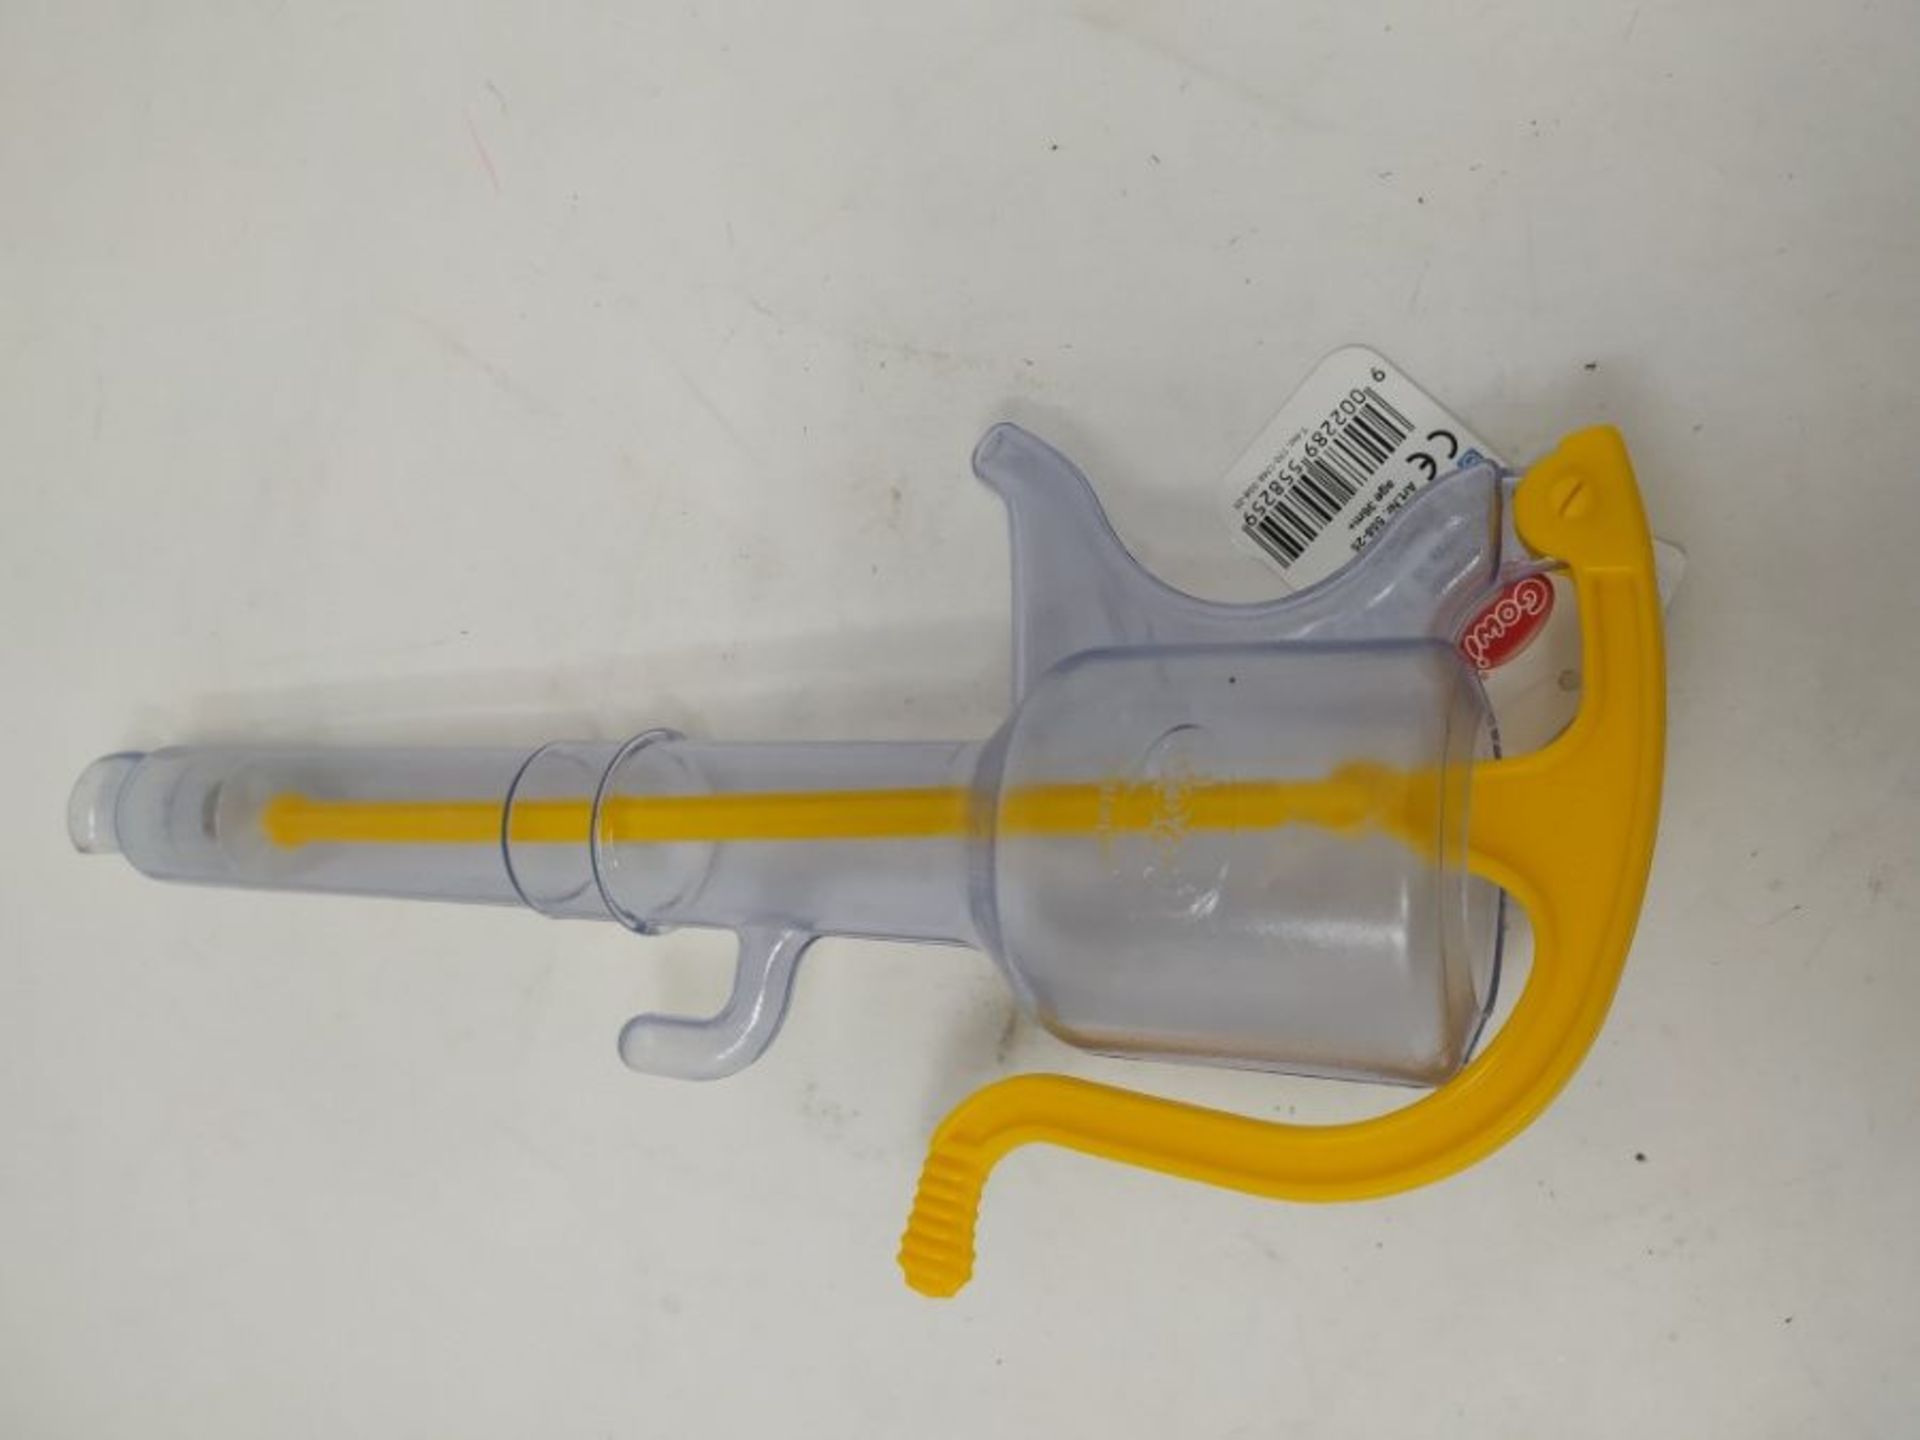 Gowi GW55825 Toys Clear Water Pump - Bath Toys - Image 2 of 2